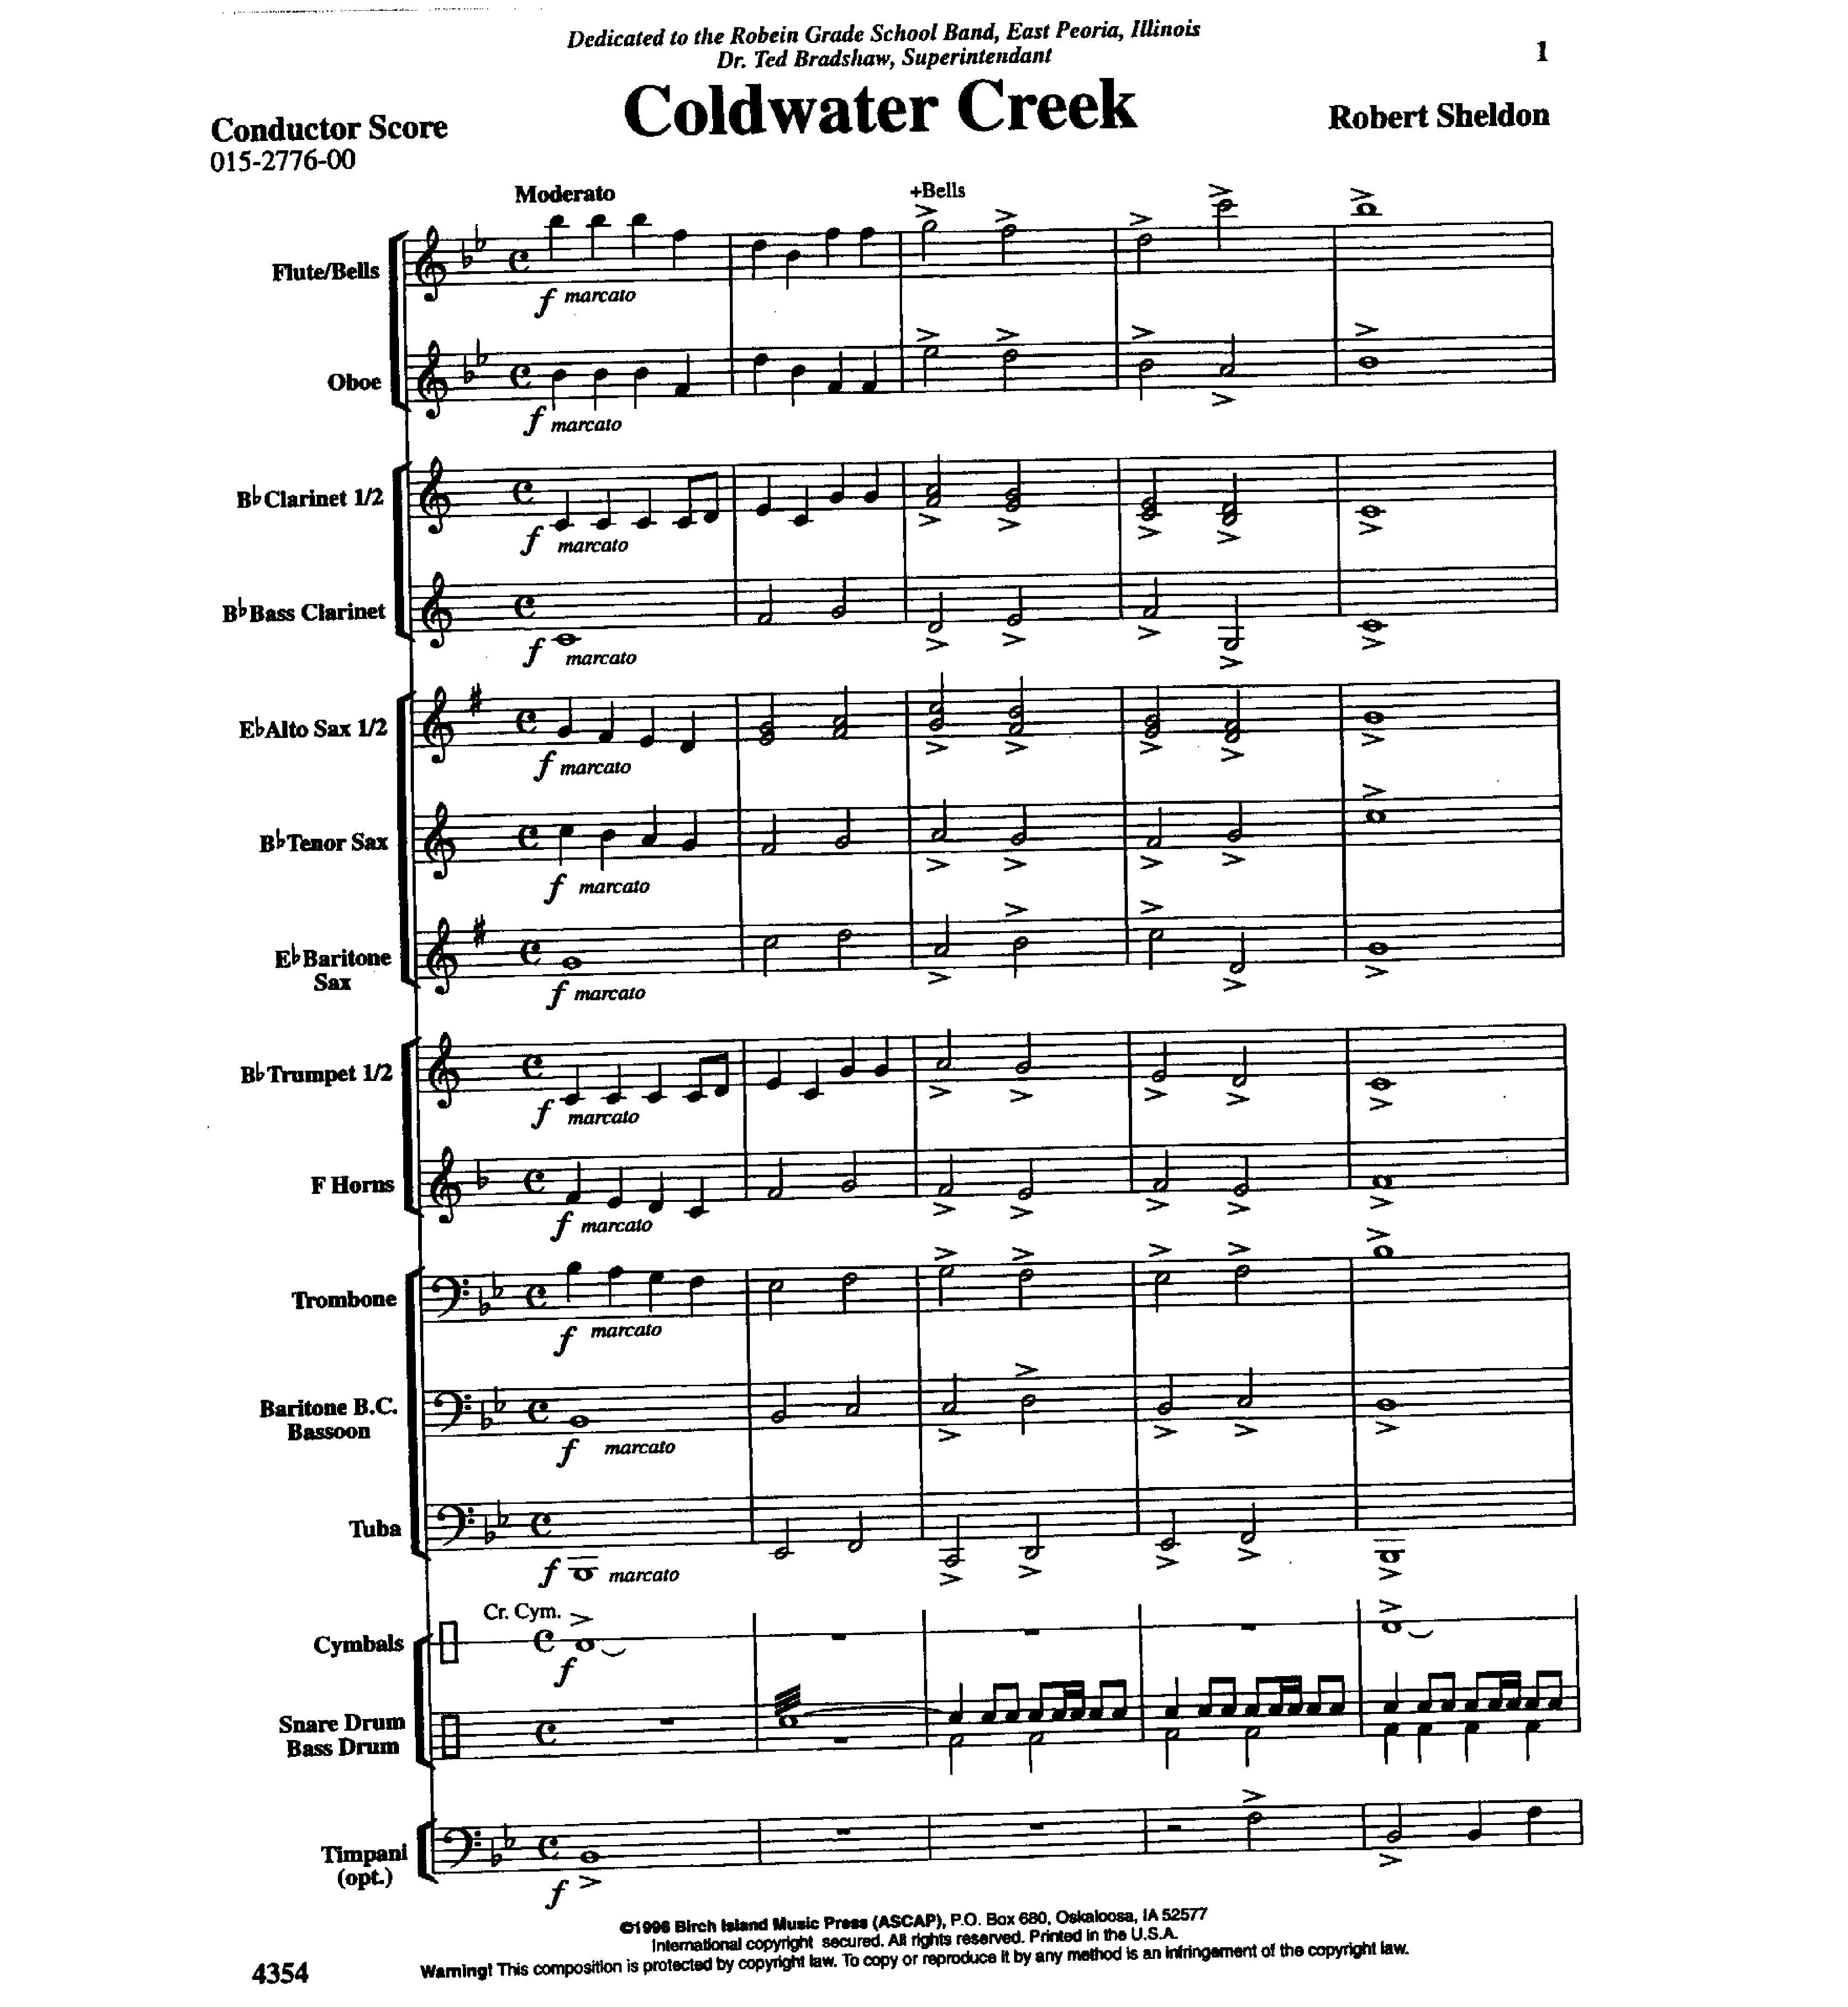 Coldwater Creek Band